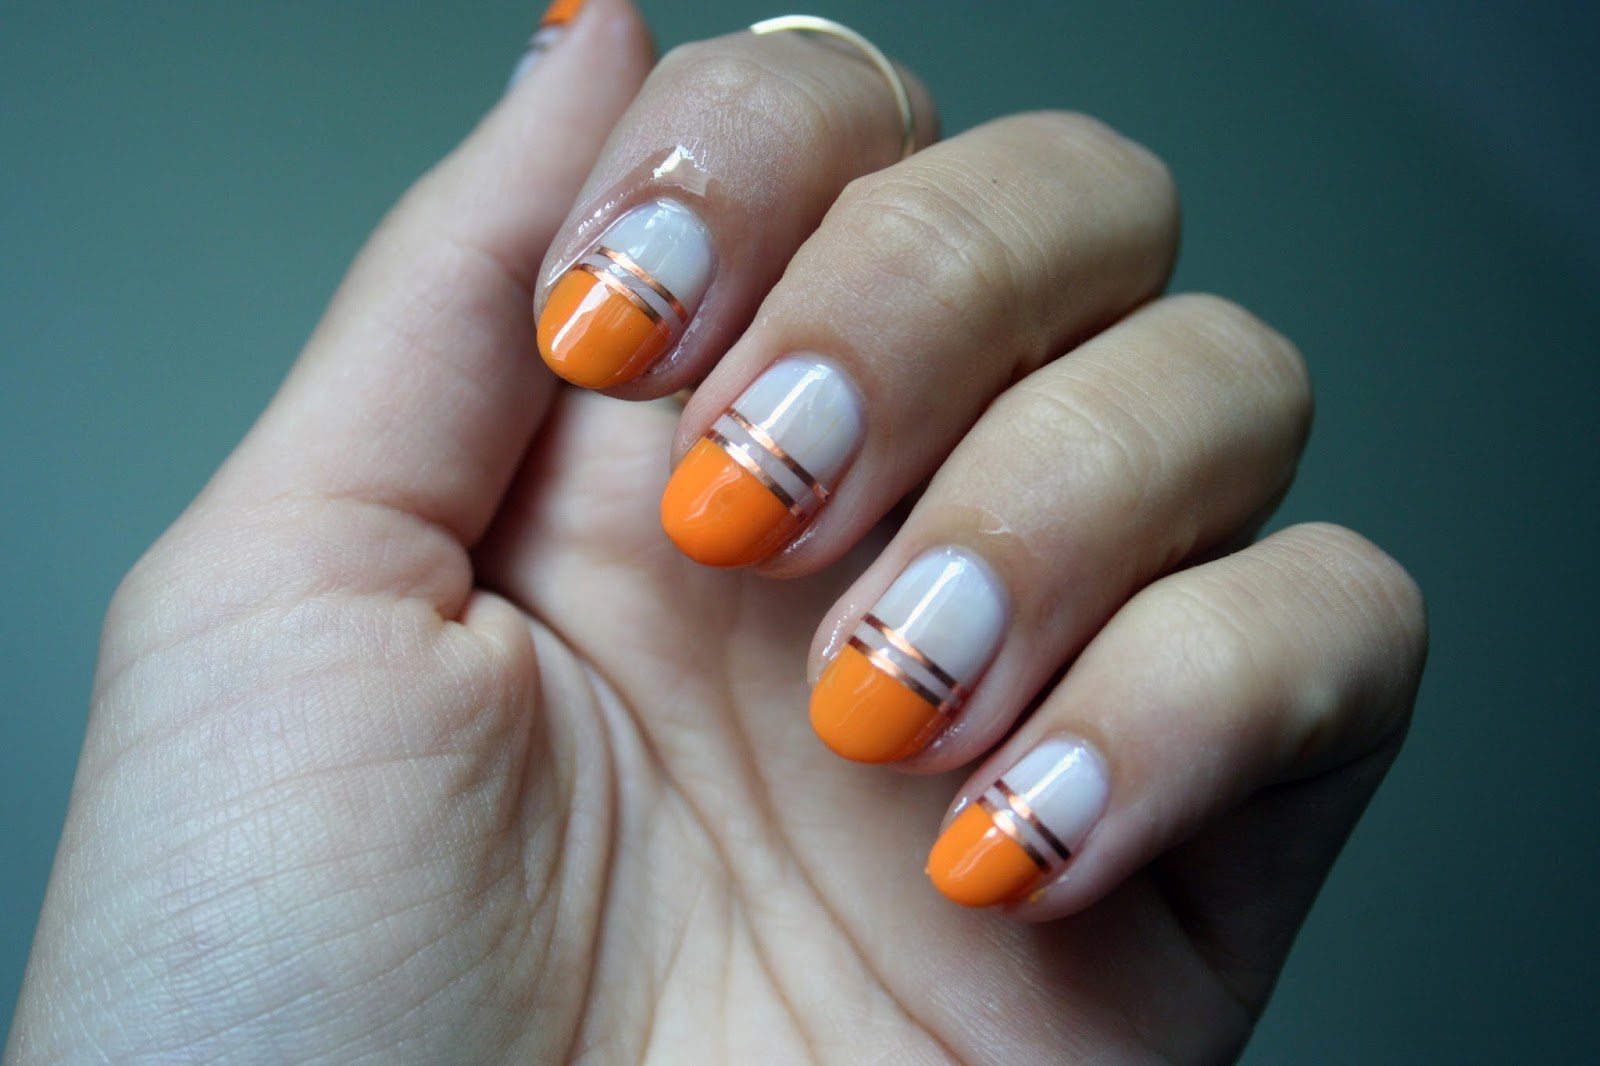 nail art with tape step by step